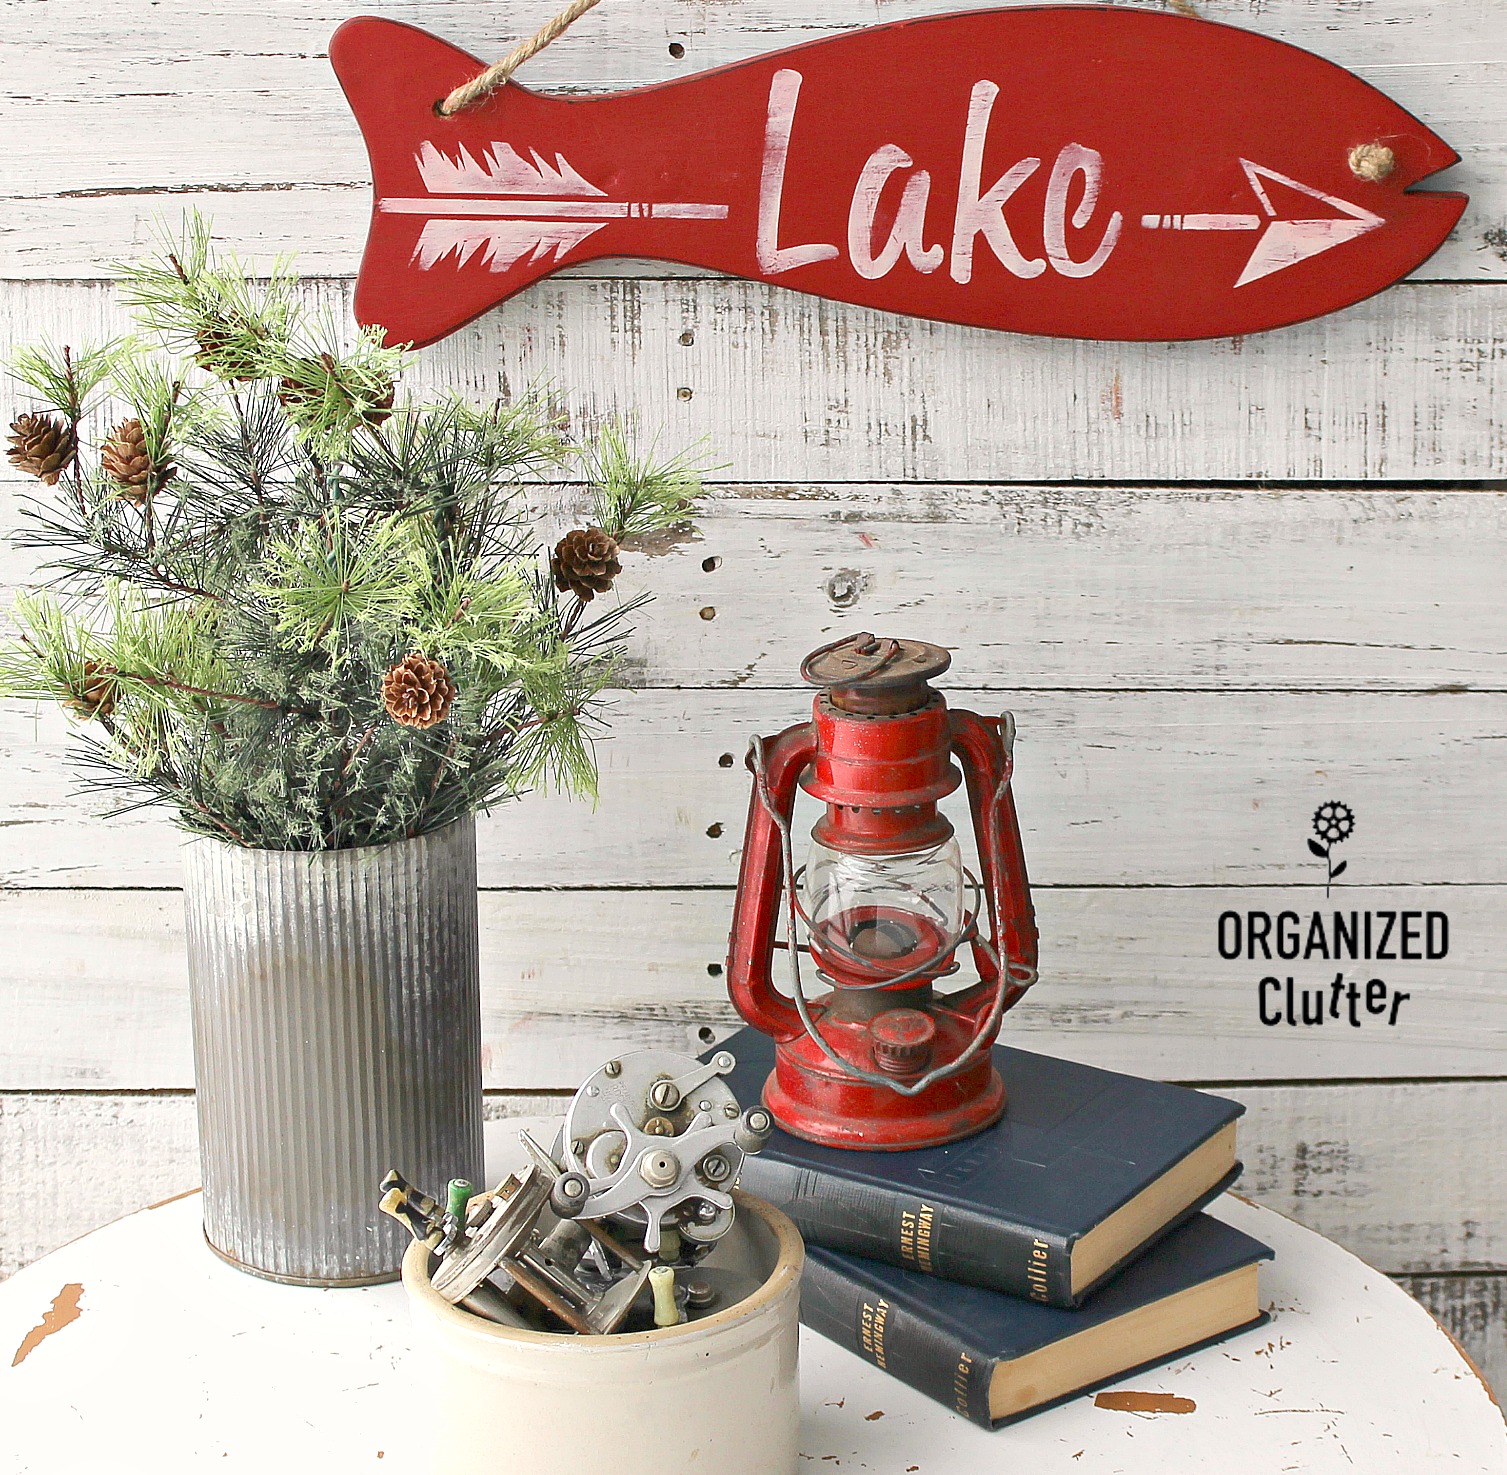 Thrift Store Fishing Rod Holder Repurposed As Lake Sign - Organized Clutter